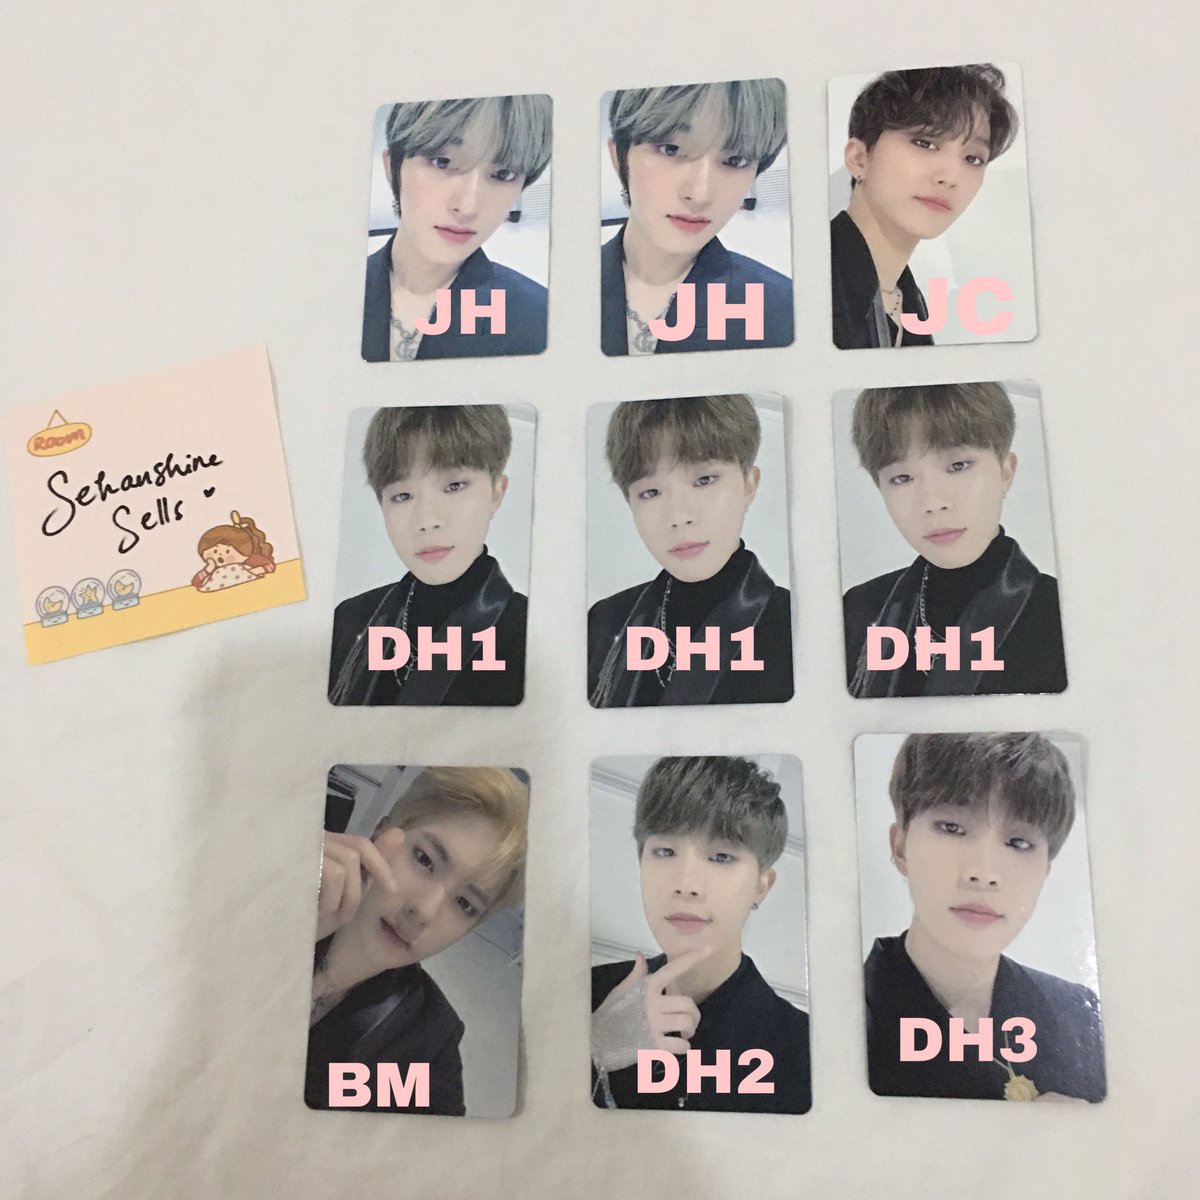  Golden Child Yes Album PCs95php each(Sungyoon has a defect so 85php na lang) Qrt mine + pc code + quantity if applicable